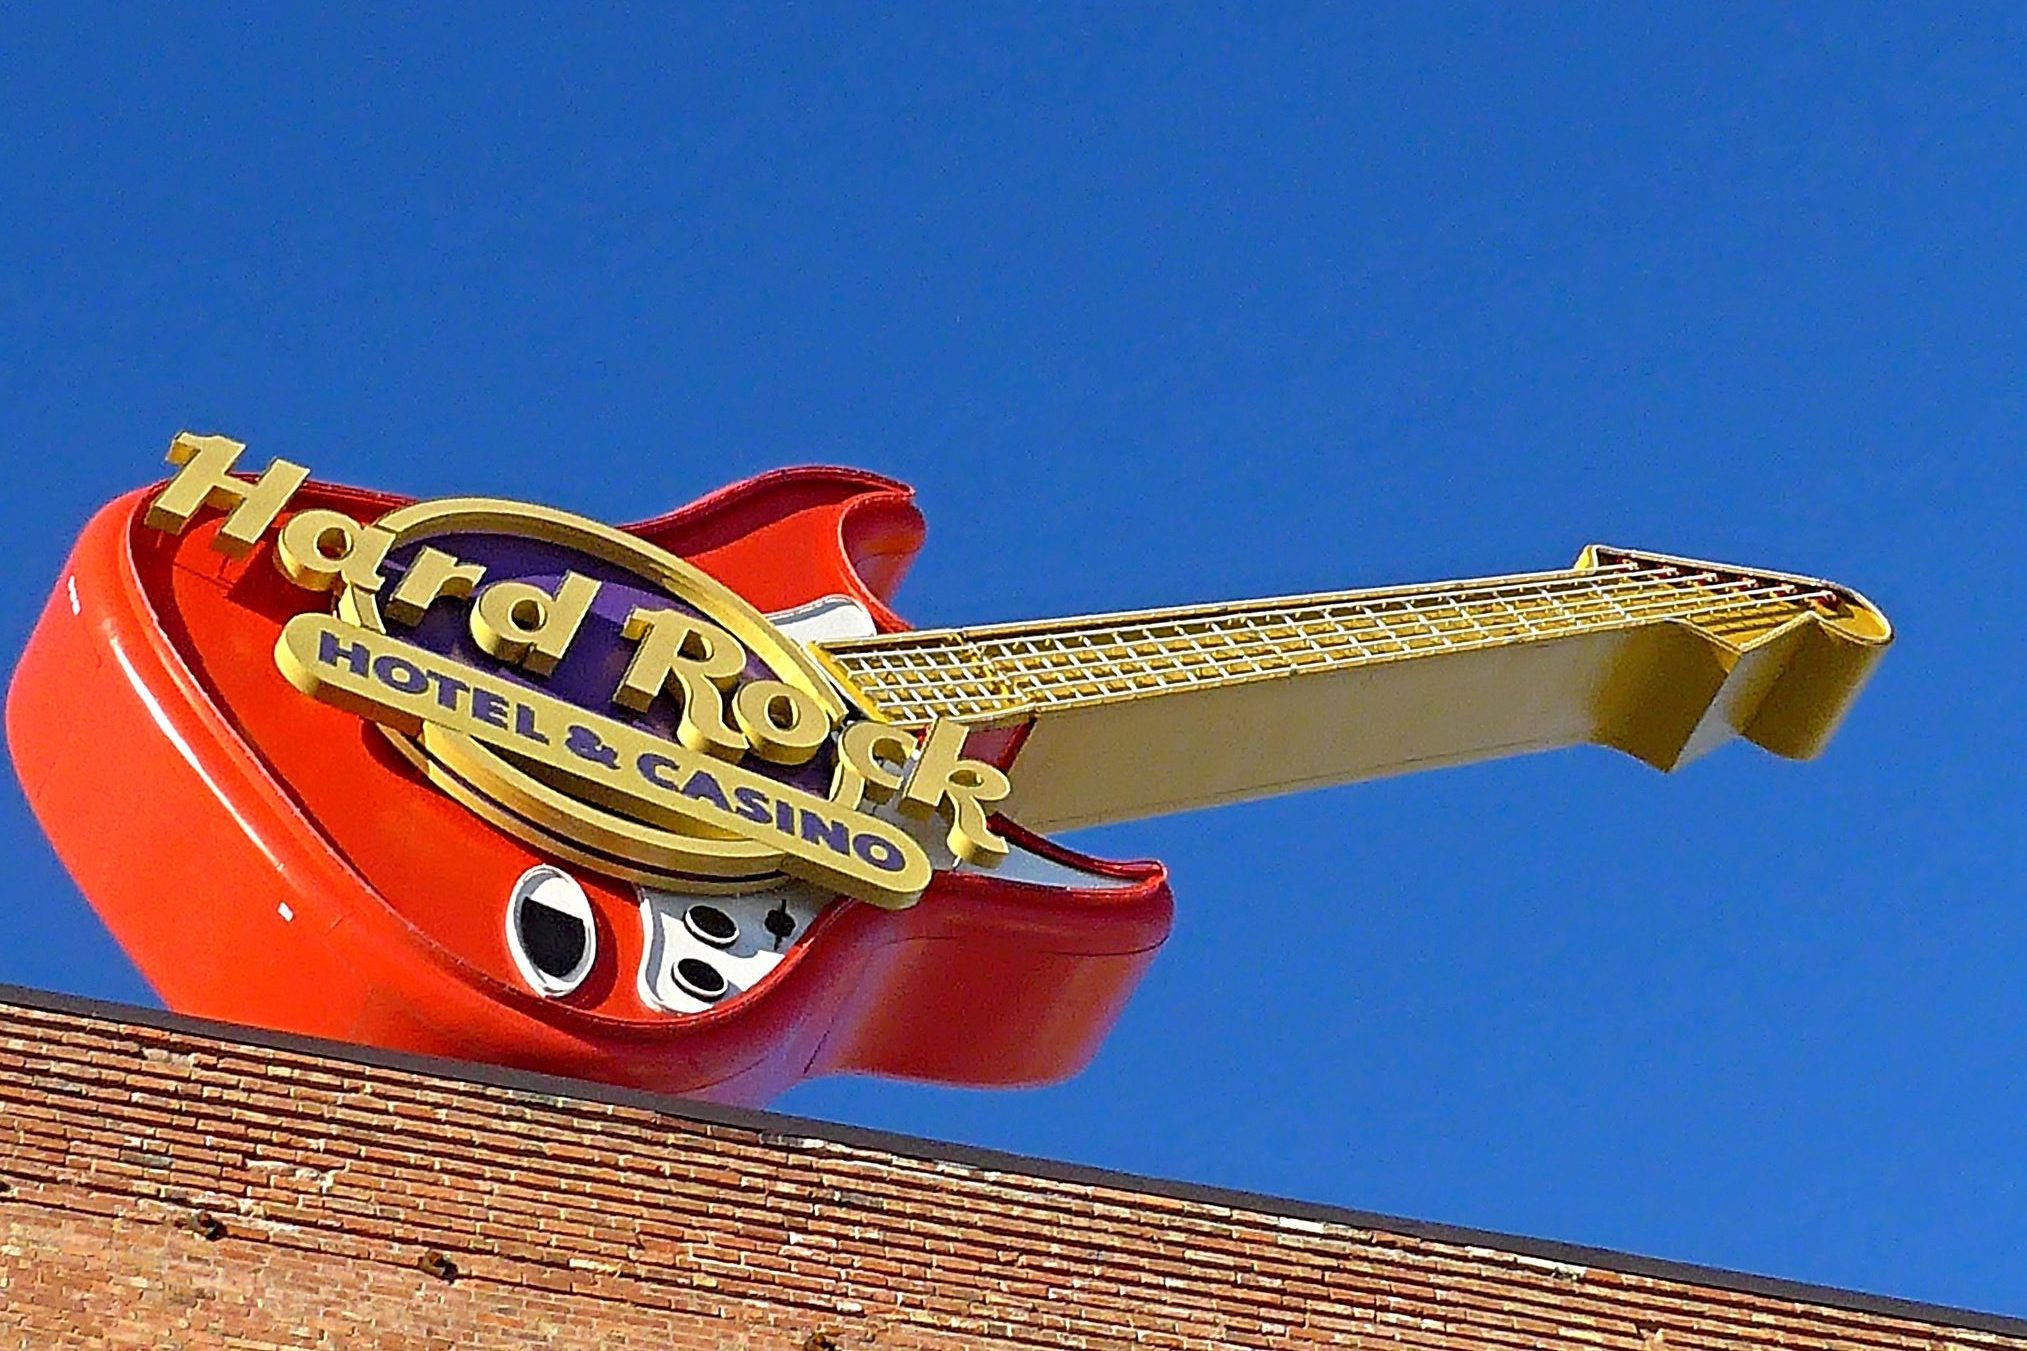 Hard Rock Hotel & Casino in Sioux City, Iowa. Red Lion is suing Hard Rock Hotels for infringement.